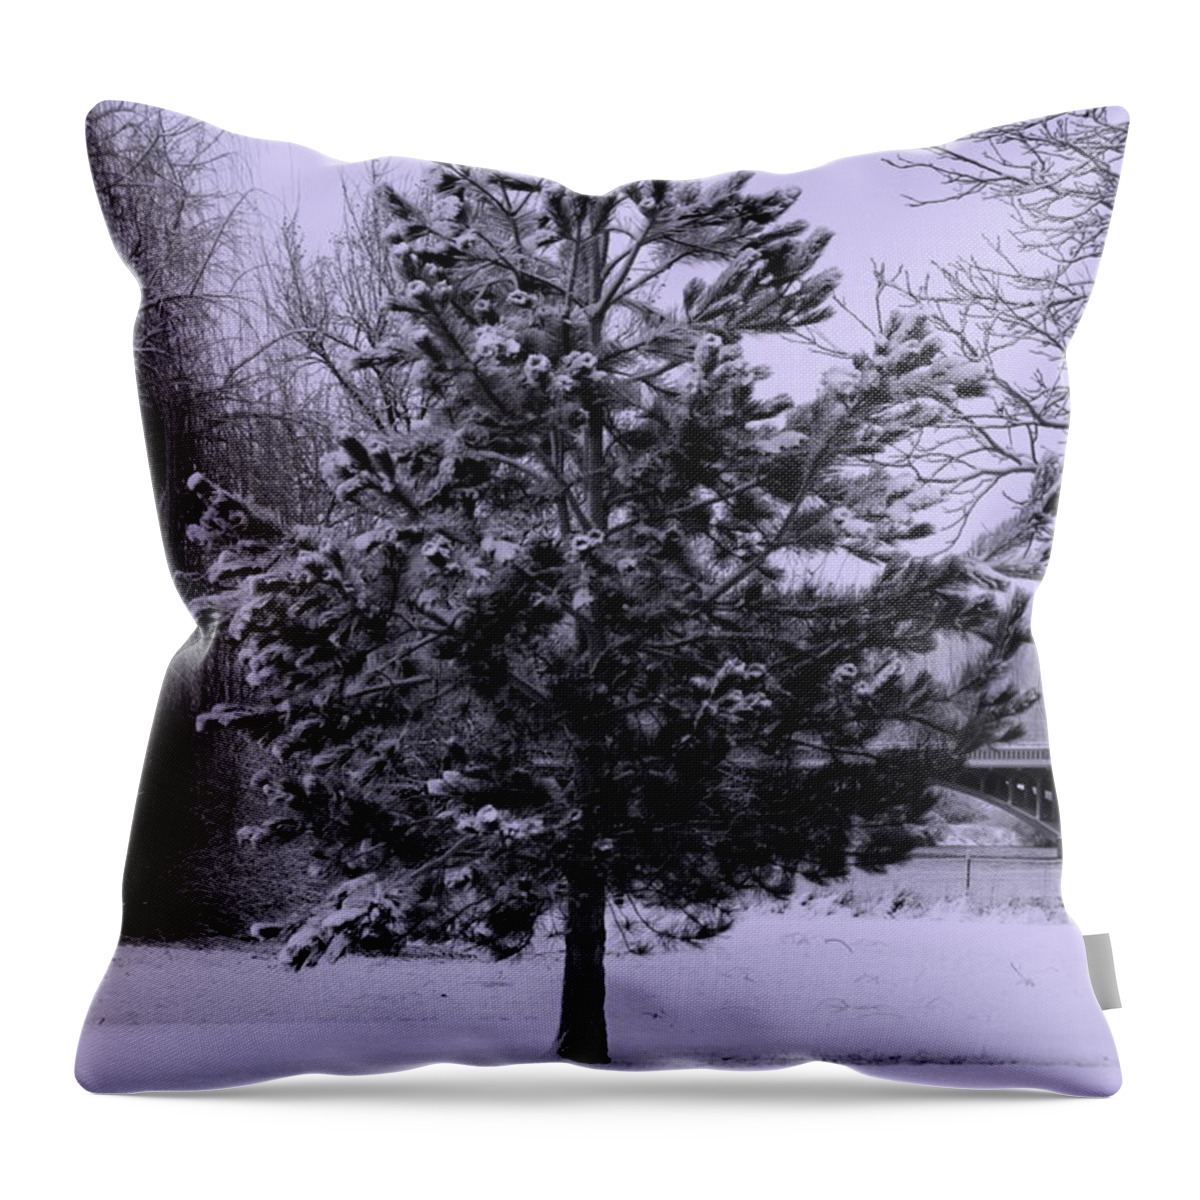 Peaceful Holiday Card Throw Pillow featuring the photograph Peaceful Holidays by Carol Groenen